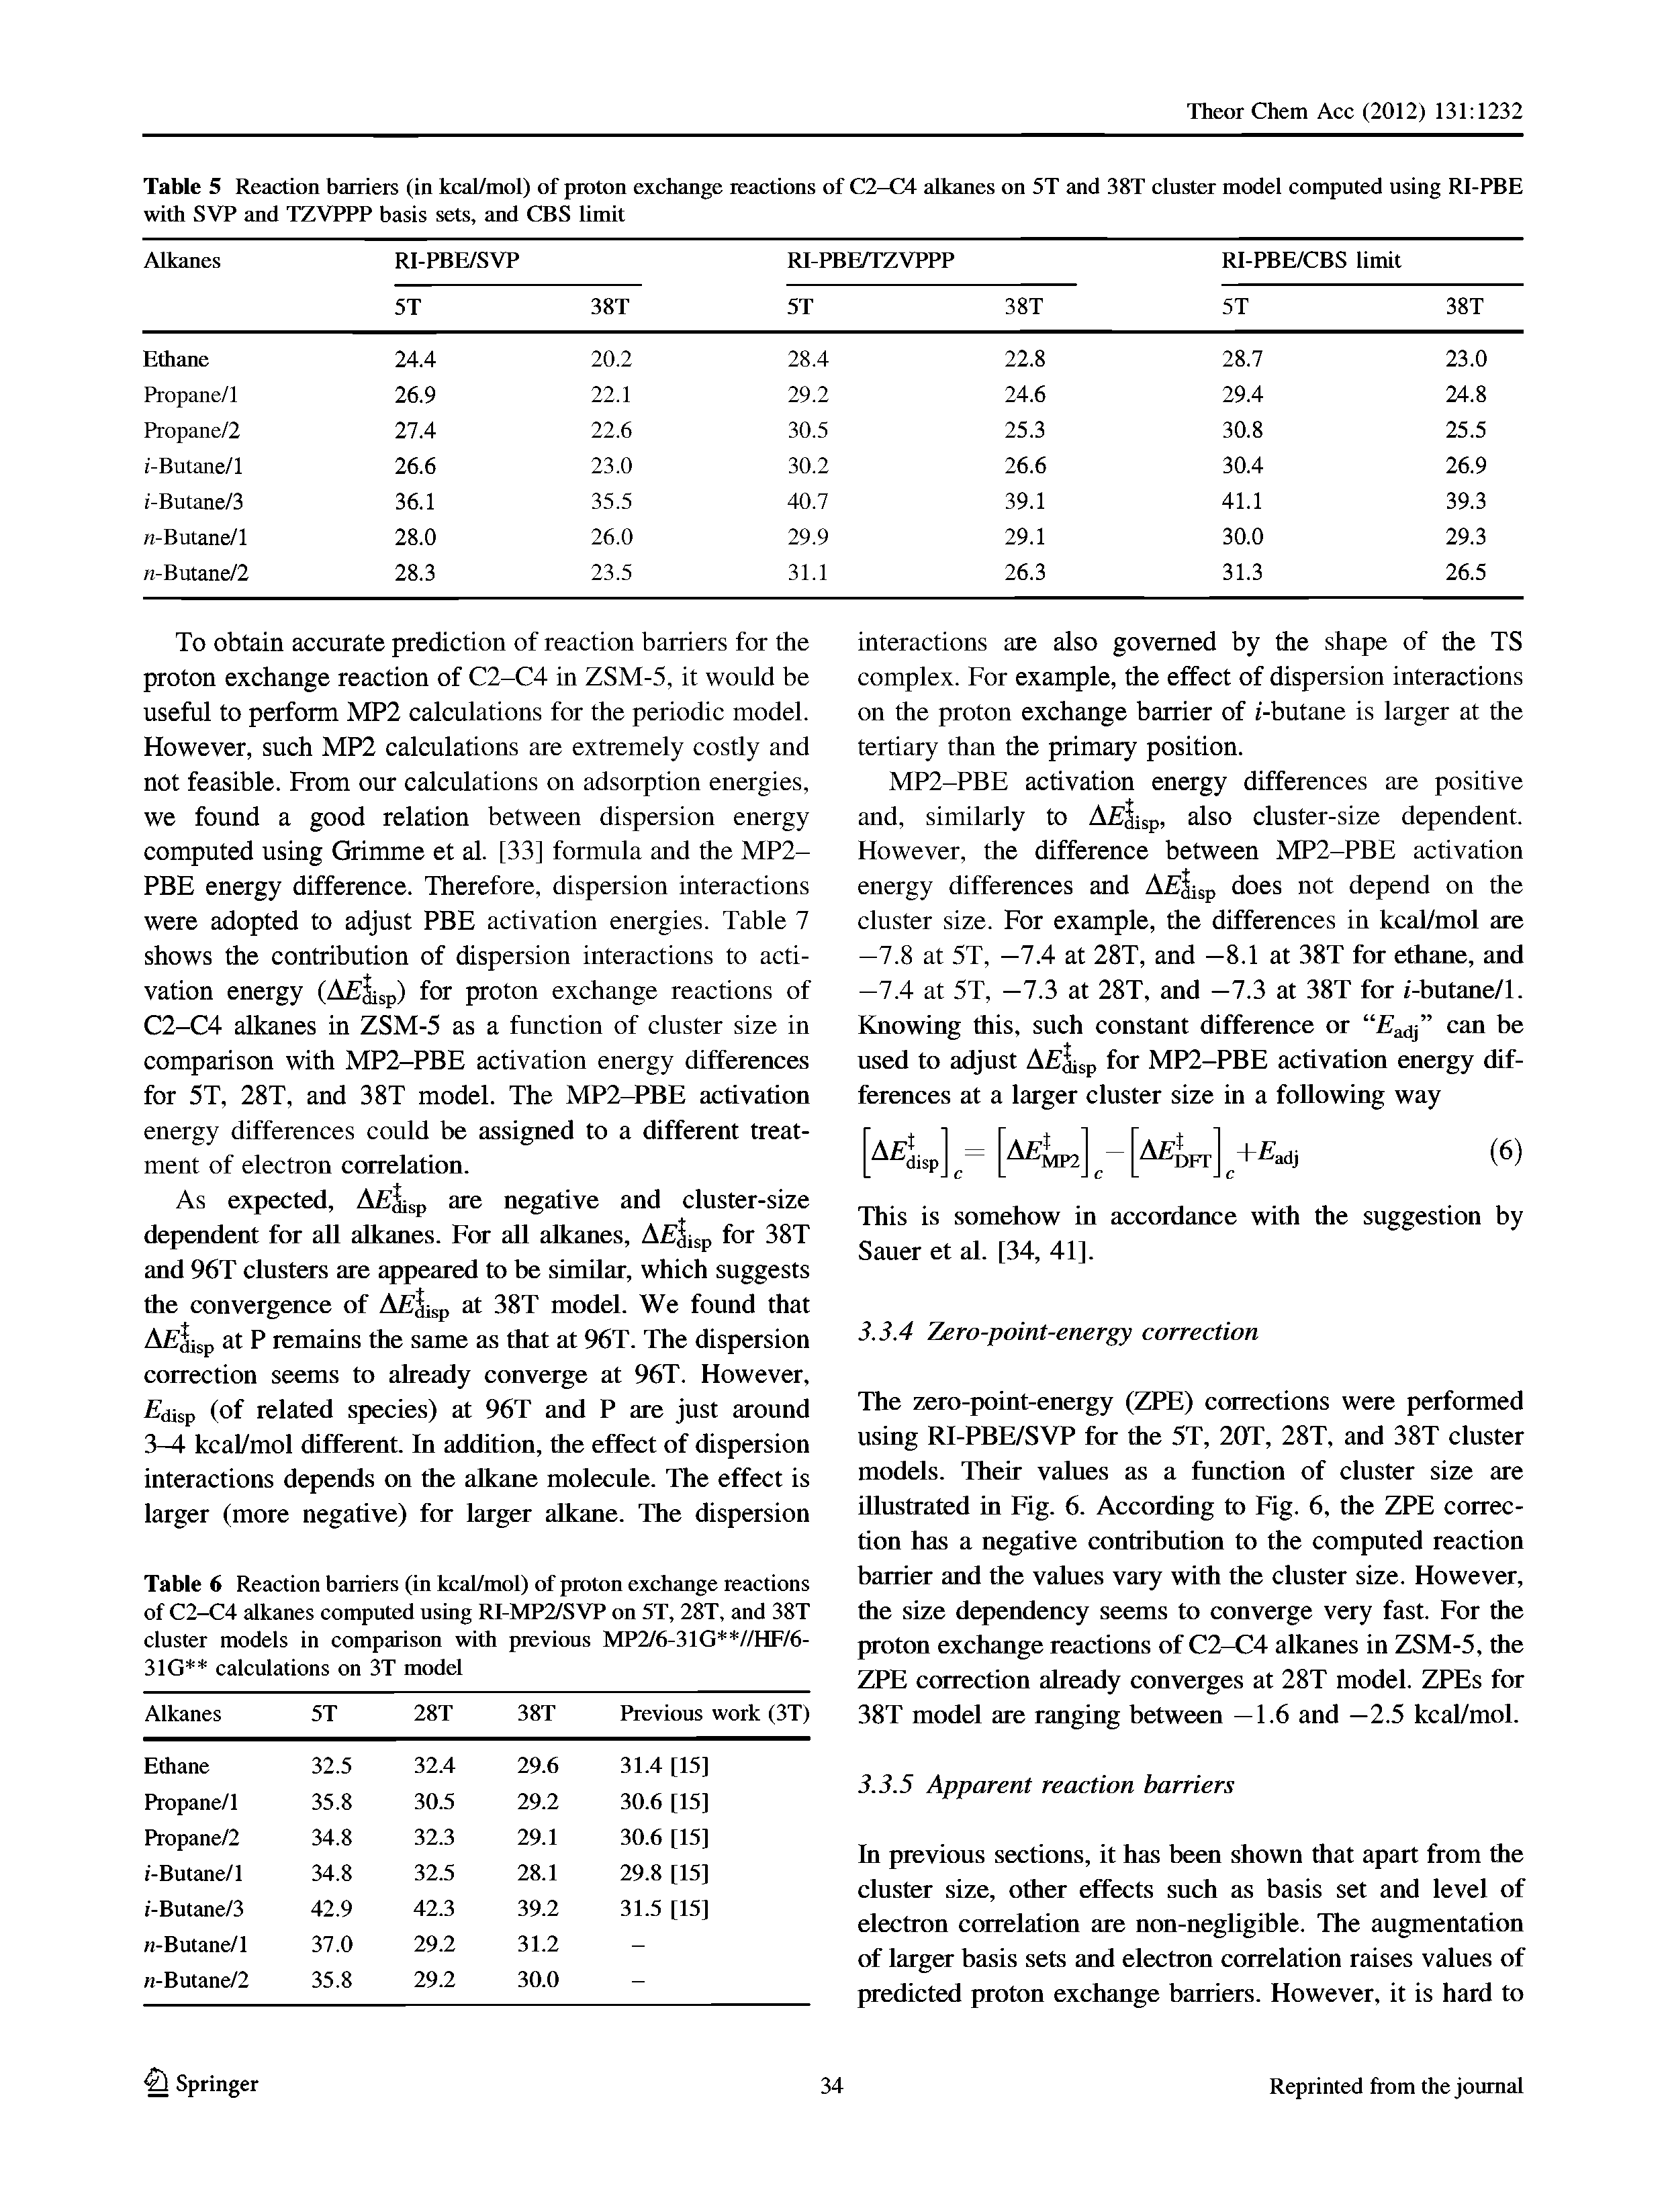 Table 6 Reaction barriers (in kcal/mol) of proton exchange reactions of C2-C4 alkanes computed using RI-MP2/SVP on 5T, 28T, and 38T cluster models in comparison with previous MP2/6-31G //HF/6-31G calculations on 3T model...